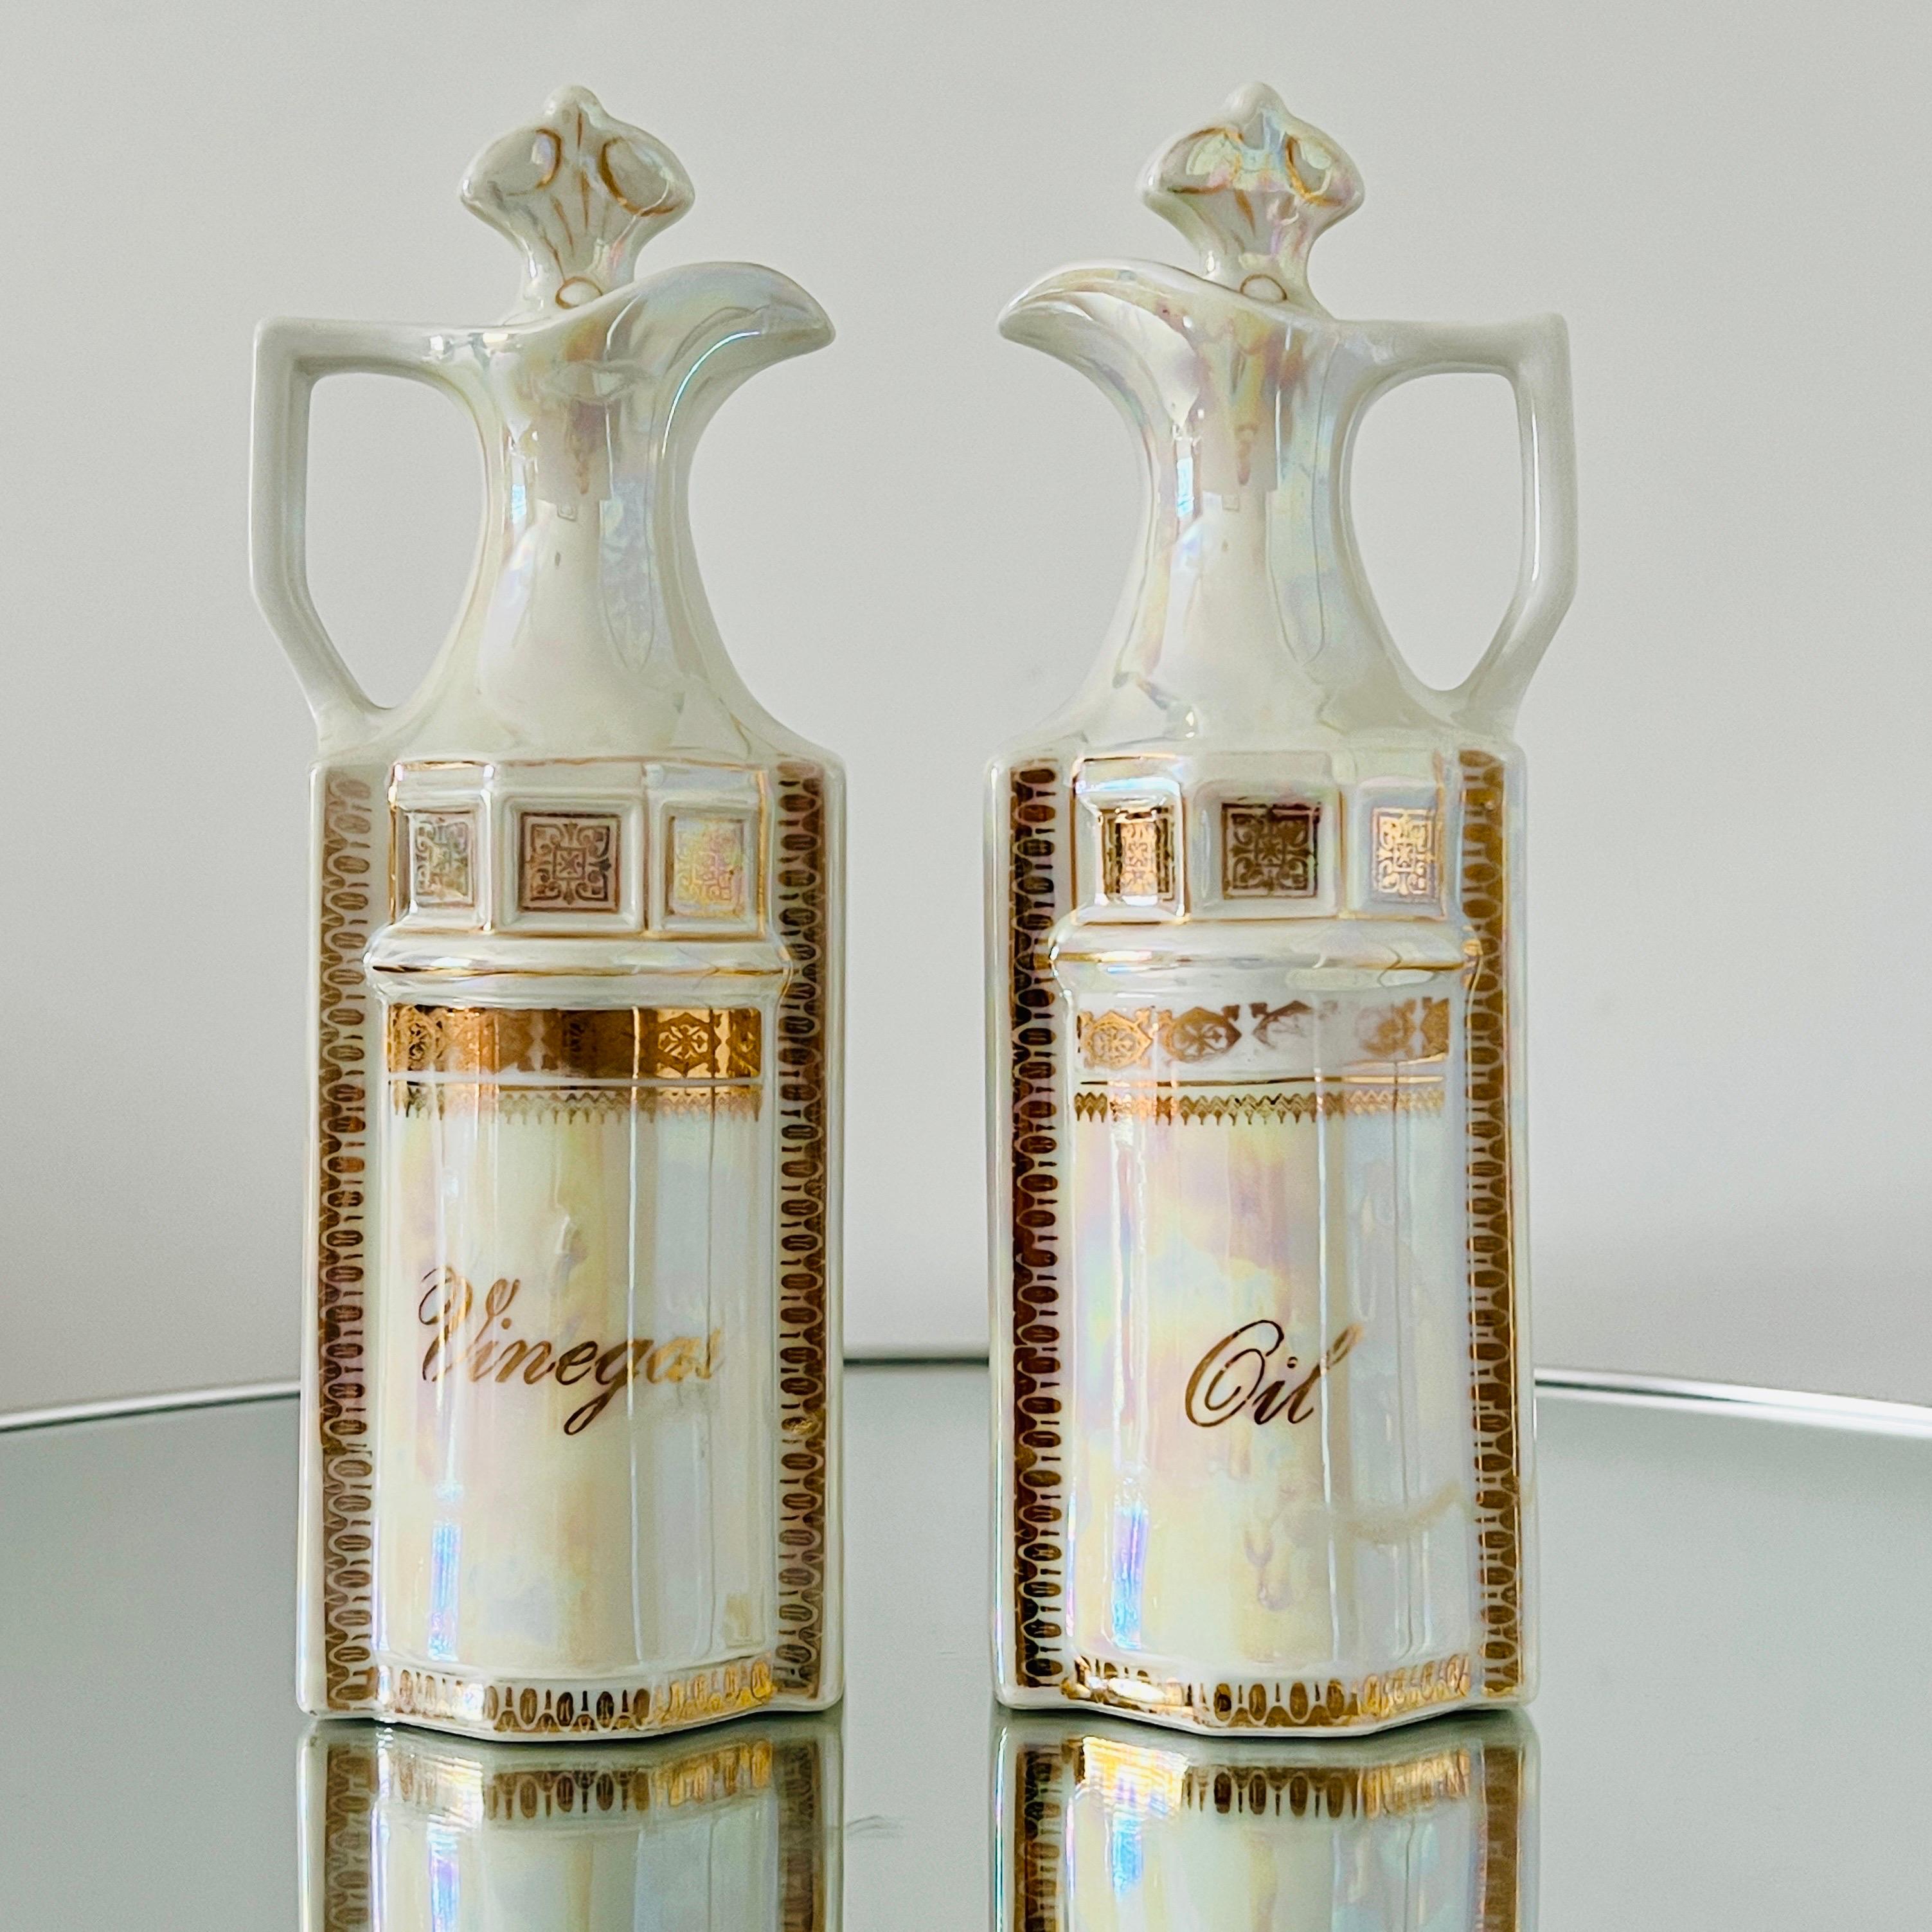 Antique Porcelain Canister Storage Jars and Spice Set / 13, Germany c. 1900 In Good Condition For Sale In Fort Lauderdale, FL